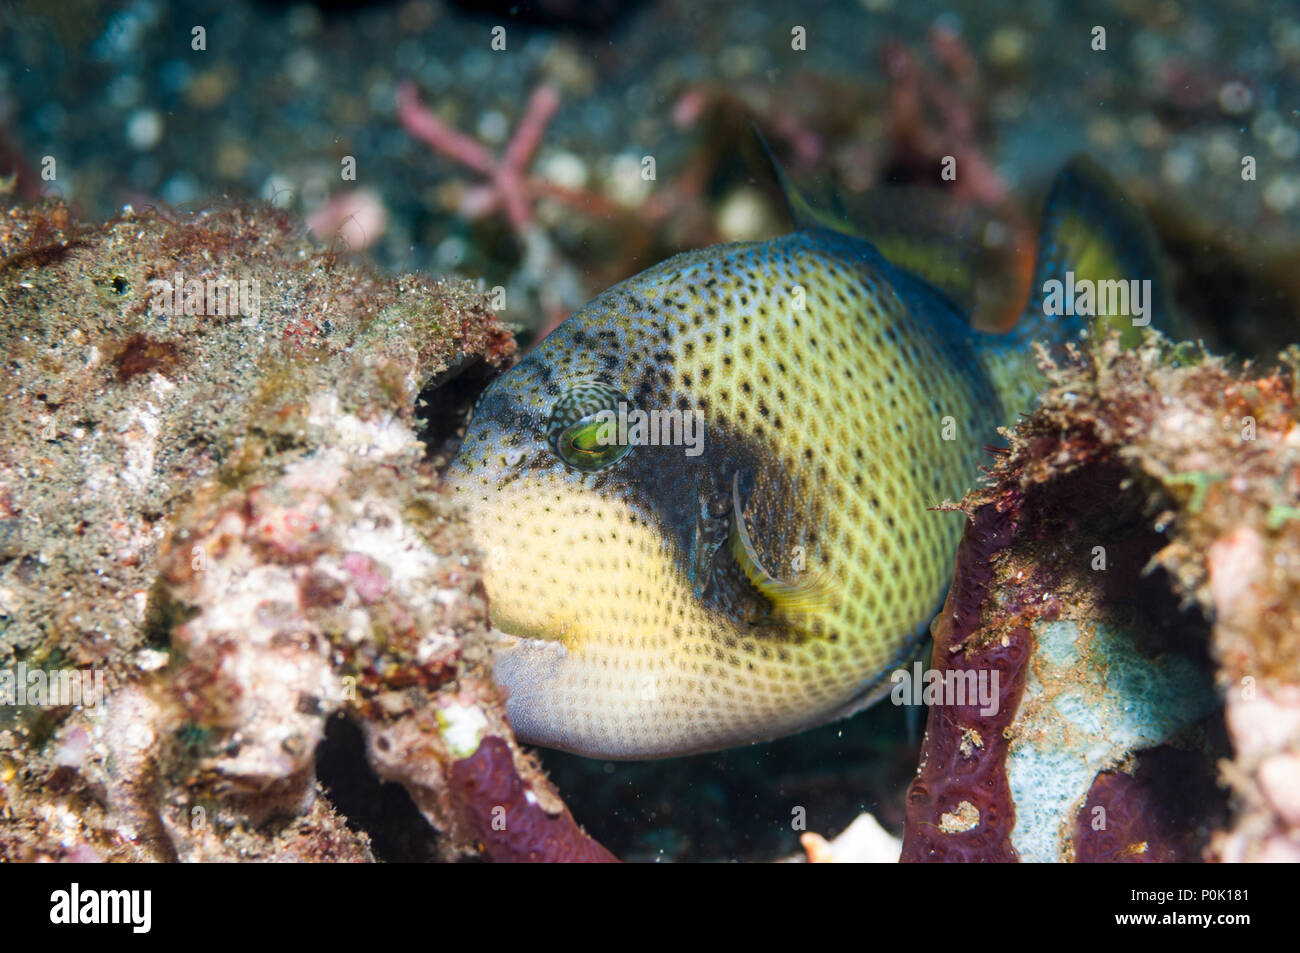 Titan triggerfish [Balistoides viridescens] juvenile about to hide in hole in coral.  Lembeh Strait, North Sulawesi, Indonesia. Stock Photo